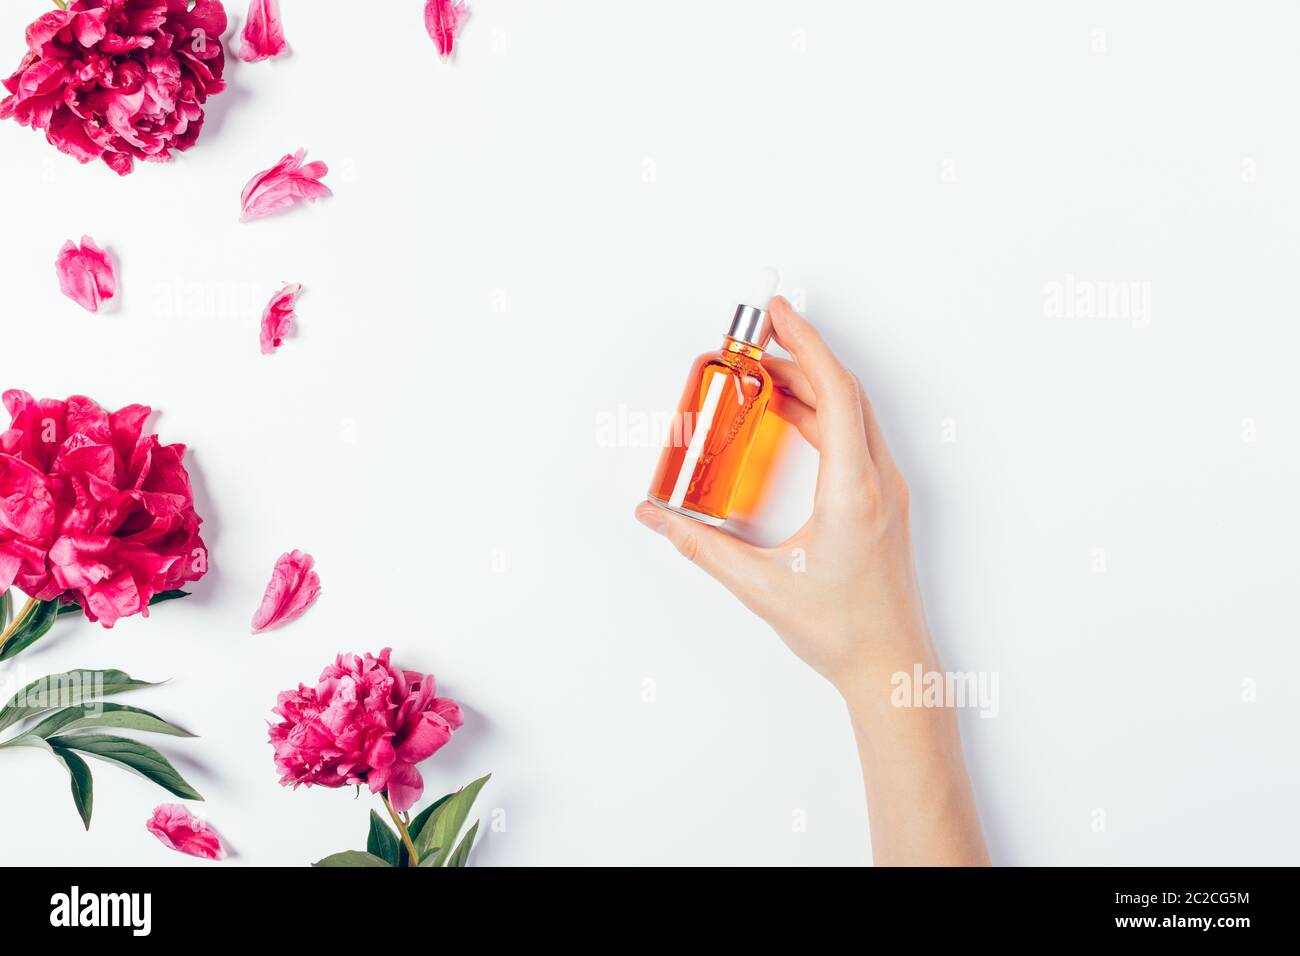 Female hand holding bottle of cosmetic serum next to fresh pink flowers on white background, flat lay. Stock Photo